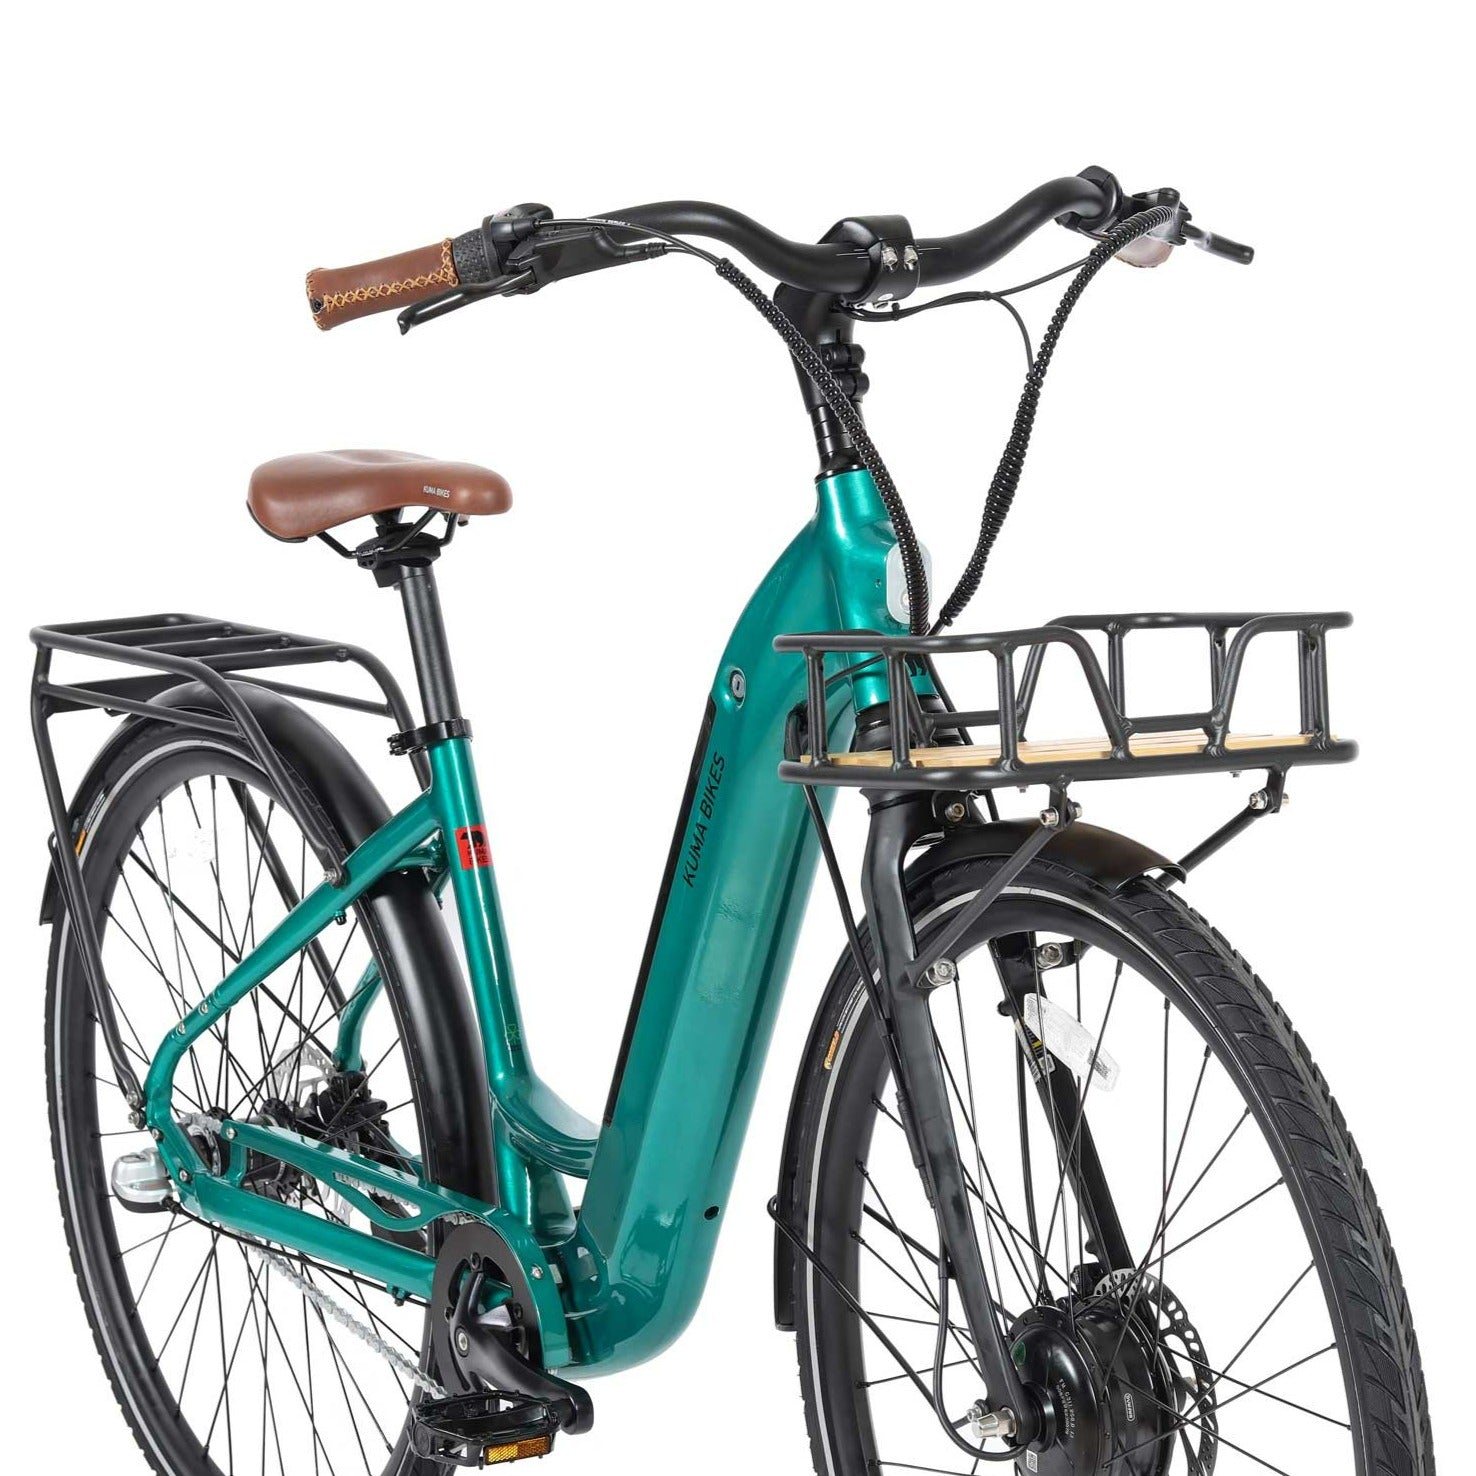 A product image of the Kuma S2 electric bike showing the front and right side of the bike against a white background. The frame colour is Emerald Green..